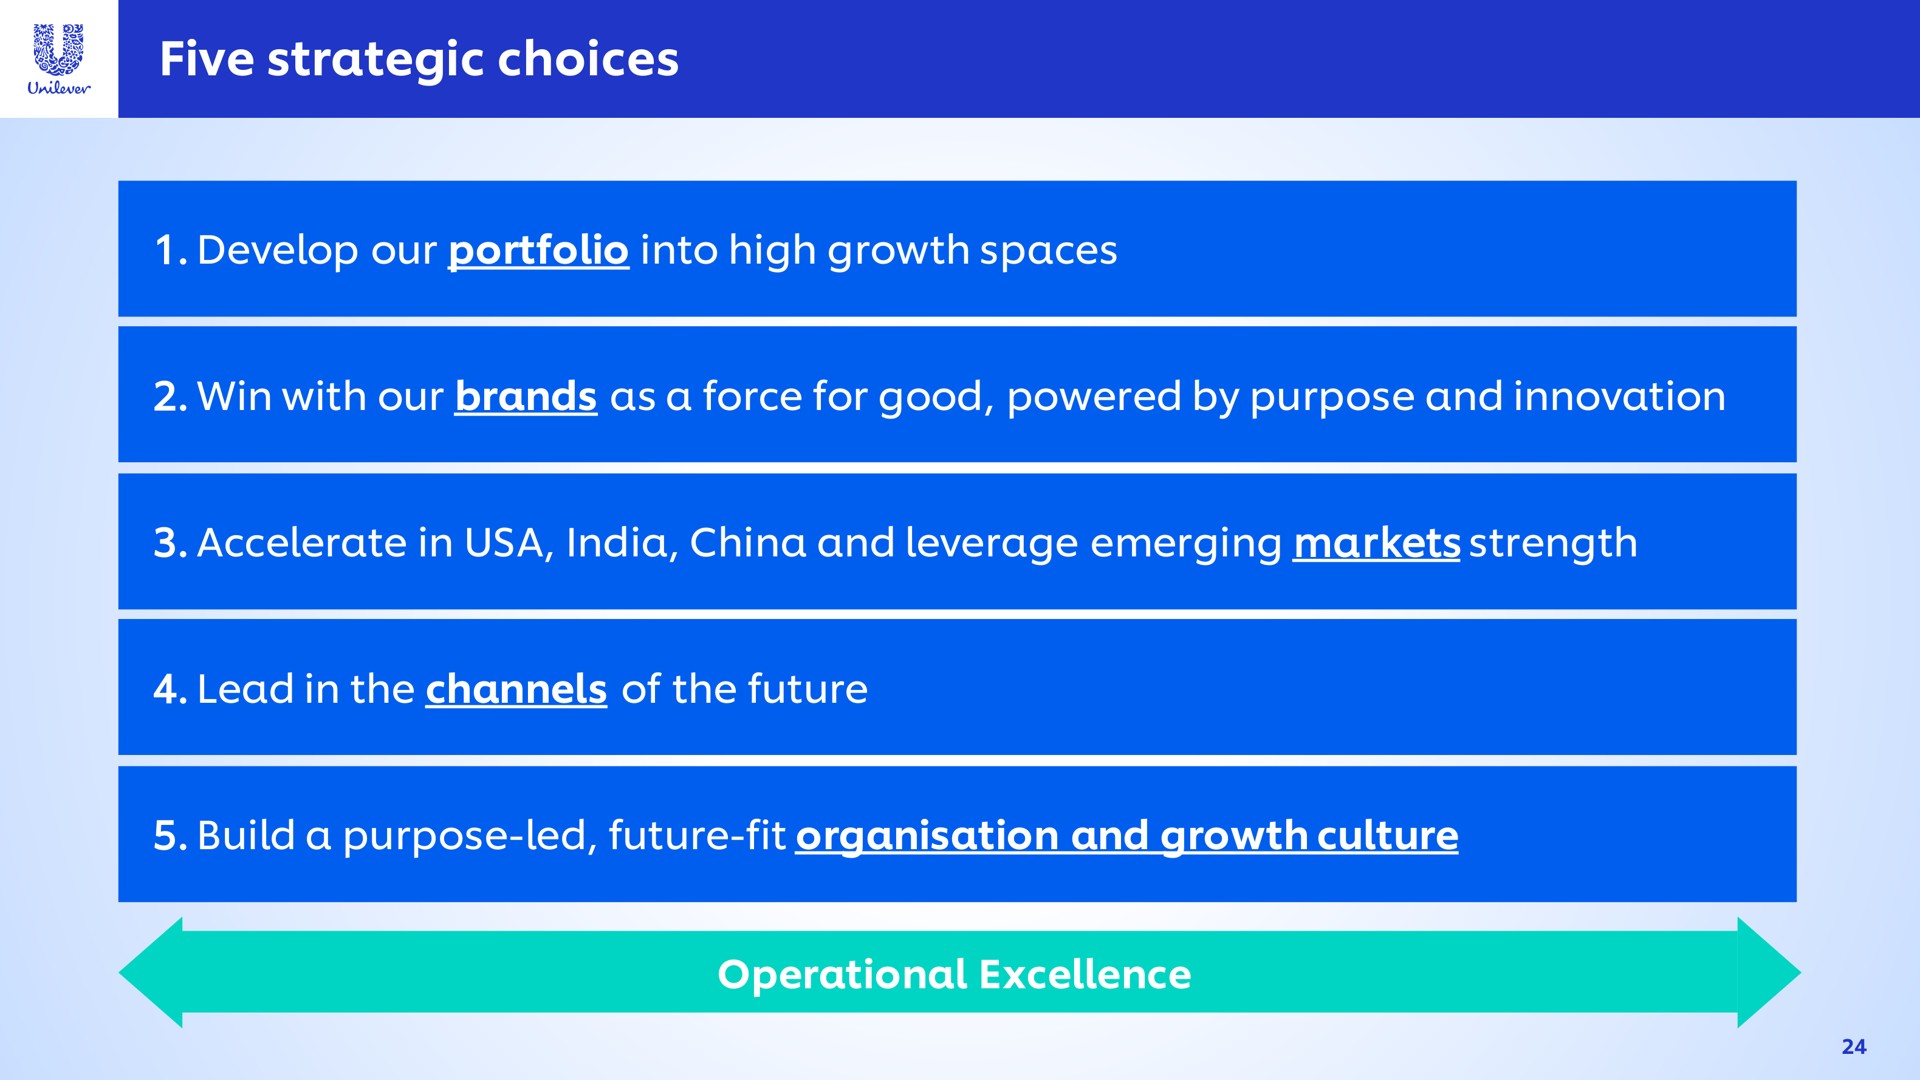 five strategic choices develop our portfolio into high growth spaces win with our brands as a force for good powered by purpose and innovation accelerate in china and leverage emerging markets strength operational excellence build a purpose led future fit and growth culture | Unilever